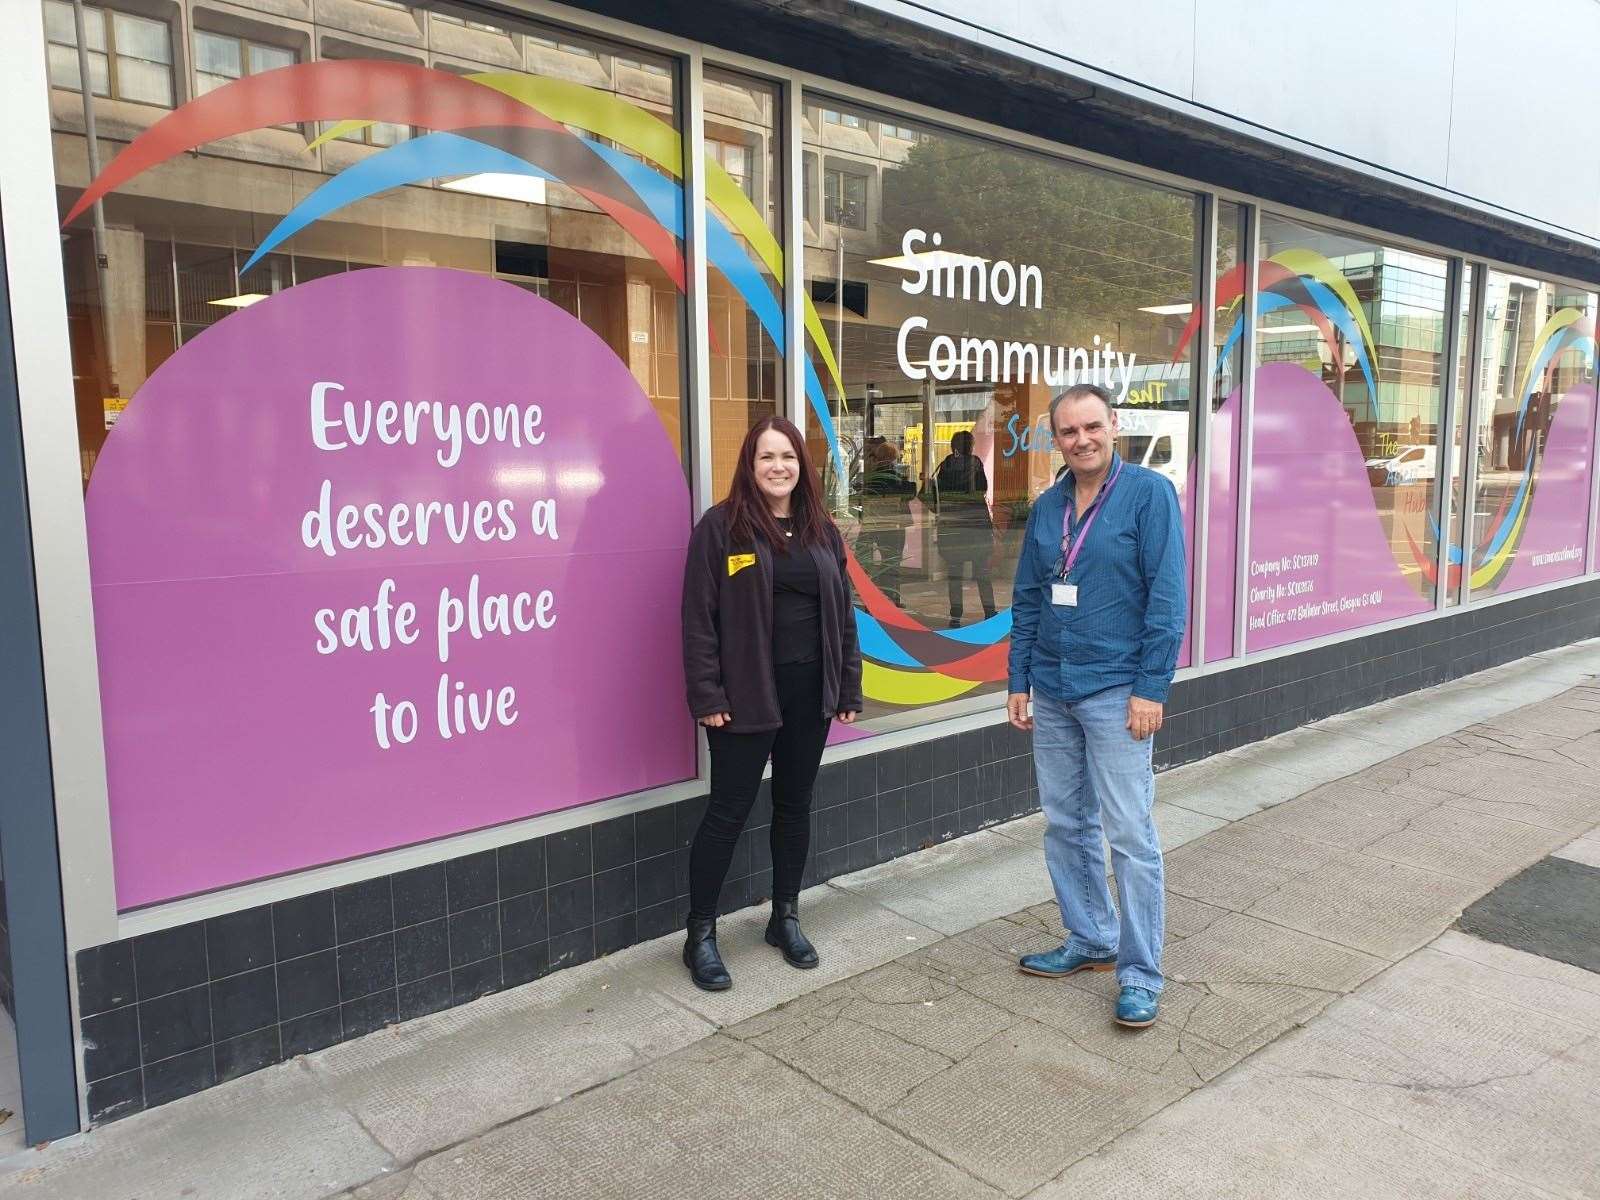 Pets and Housing Development and Engagement Officer Cat Birt and Hugh Hill, Director of Services and Development at the Simon Community.